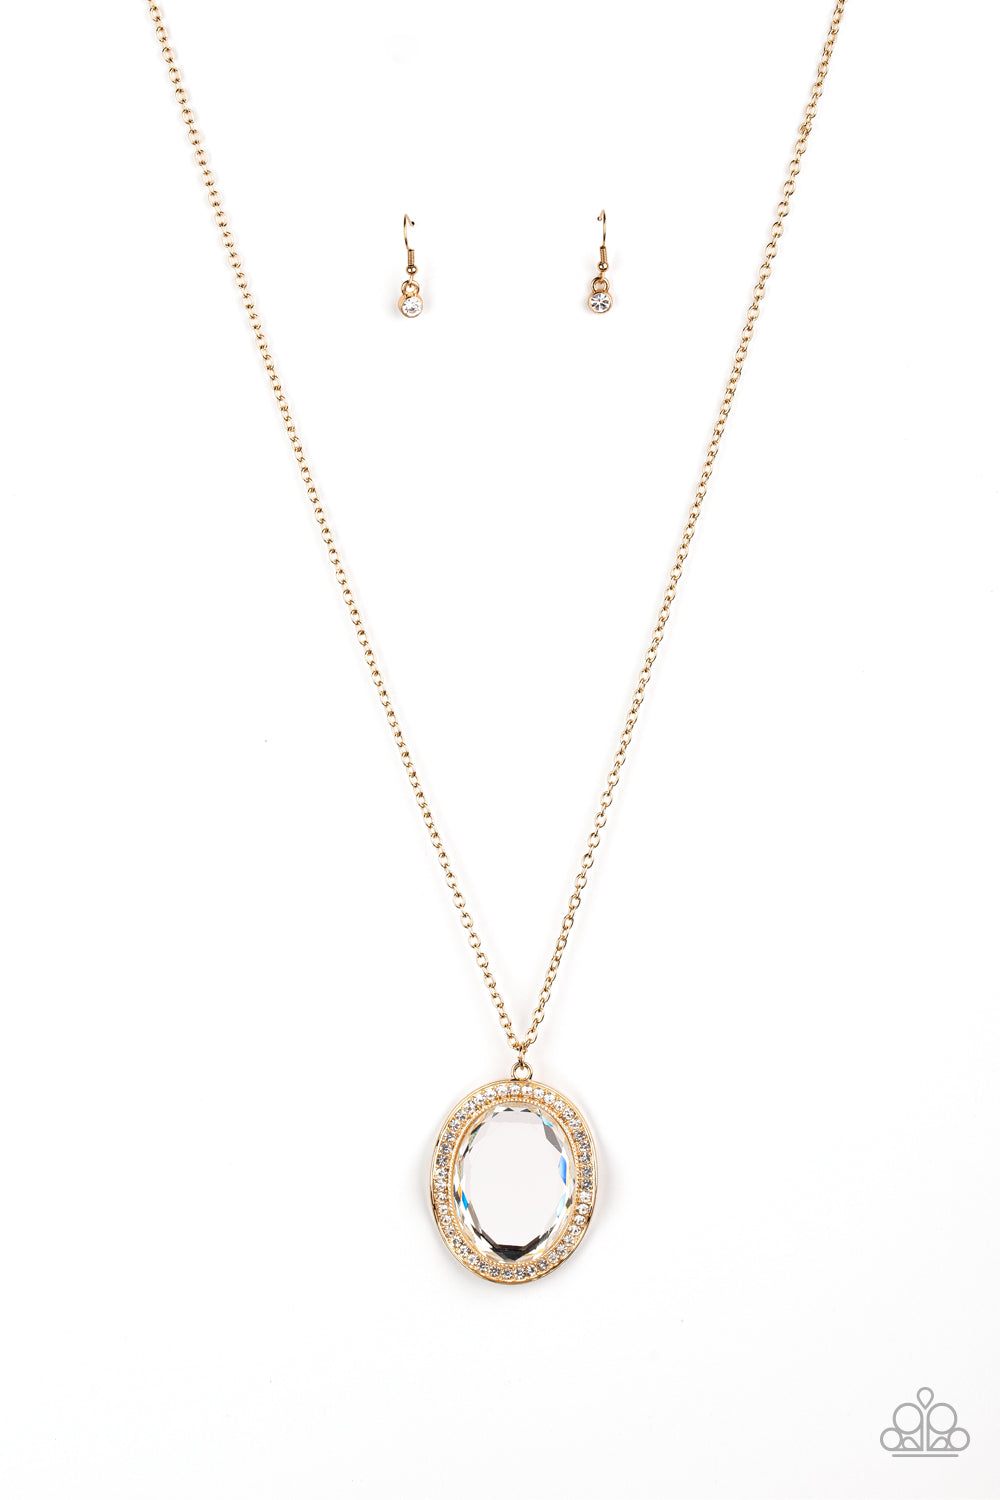 REIGN Them In Necklace (Blue, Gold)